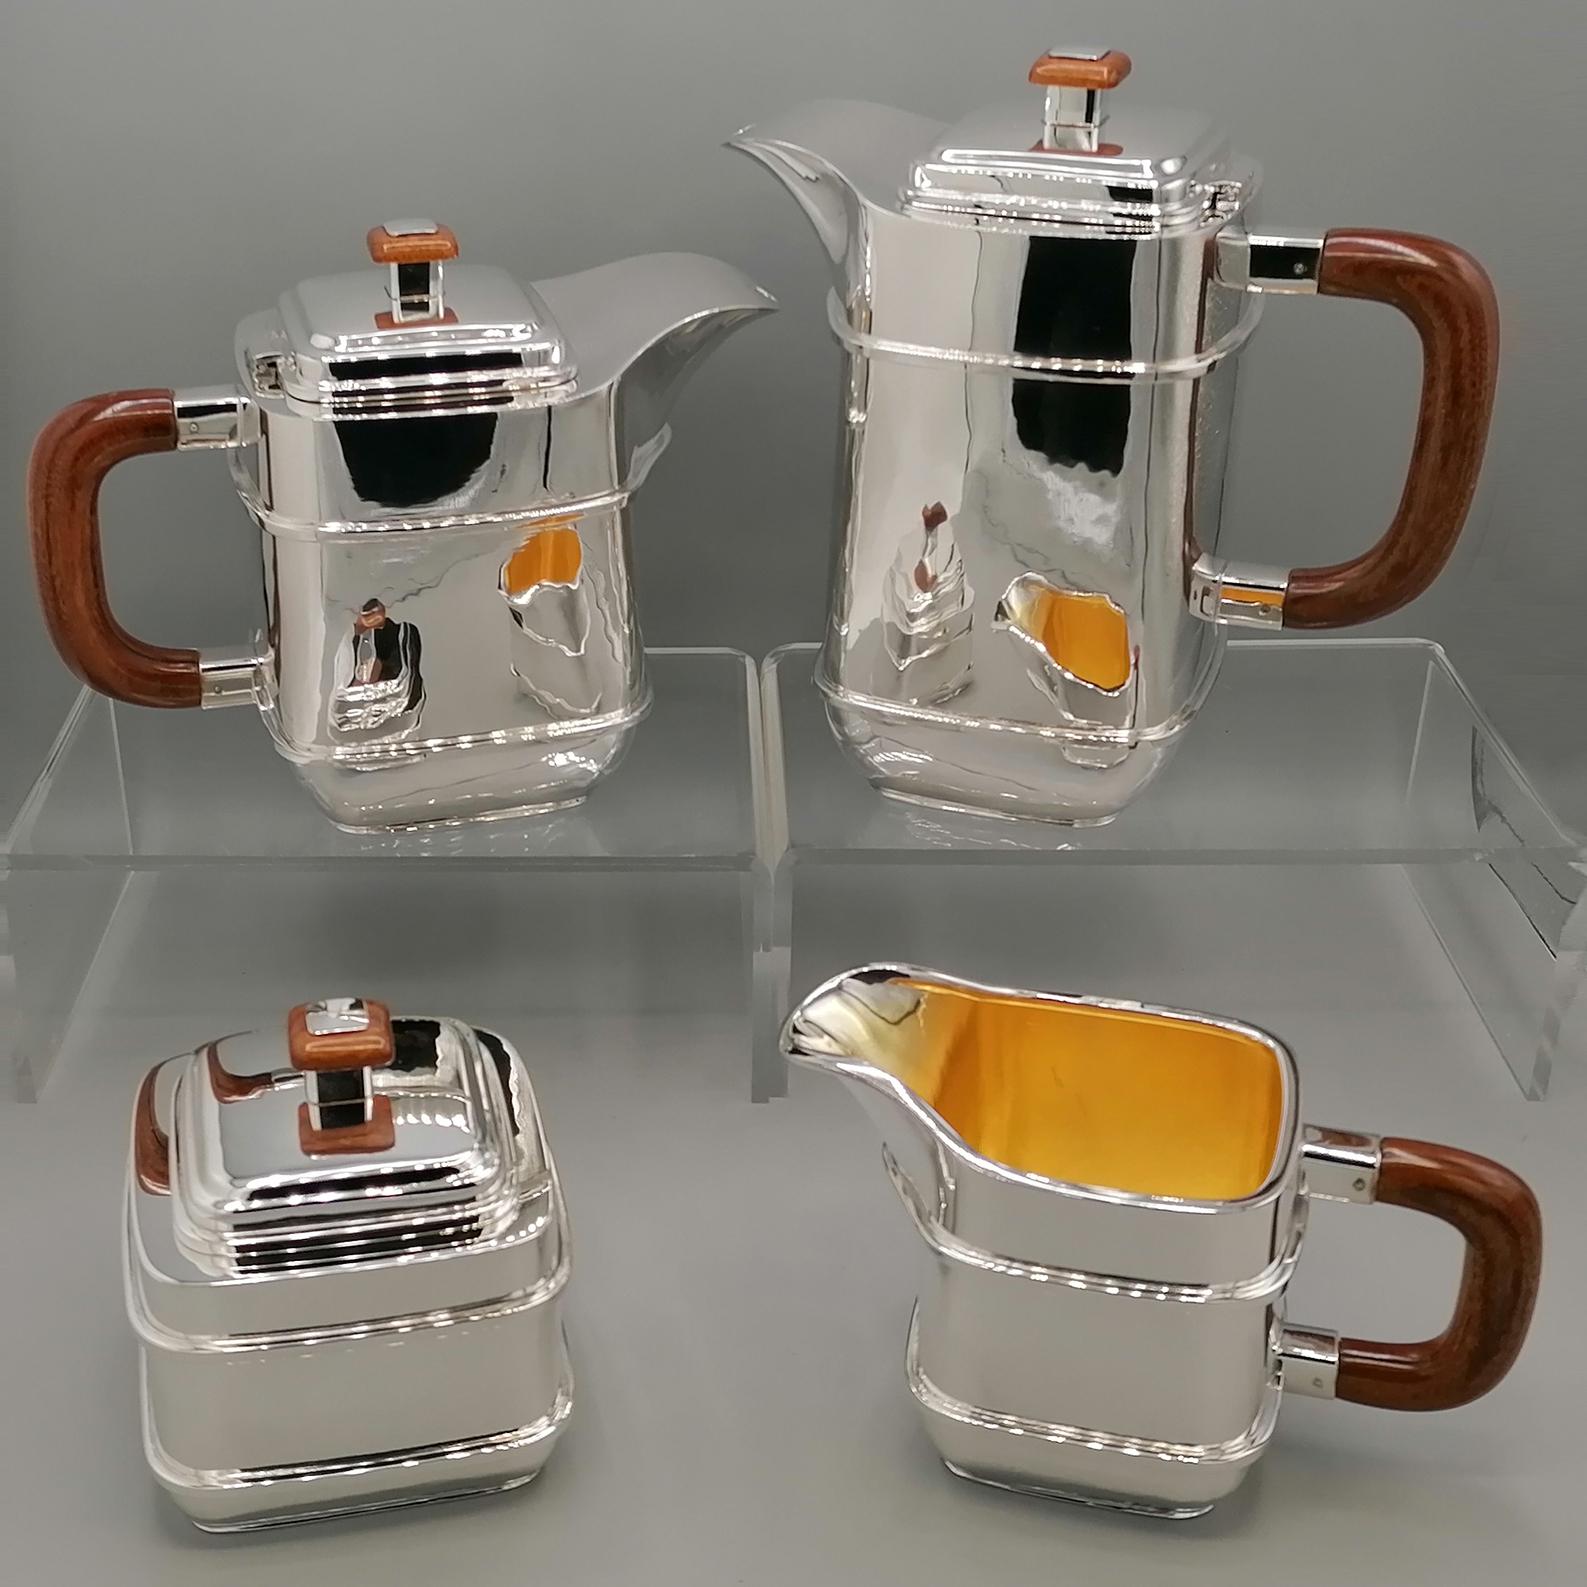 Art Deco style sterling silver tea and coffee service.
The body shape is square and completely smooth, polished with pumice stone.
Two square-section sterling silver wires were soldered onto the body to give the piece an elegant shape while not